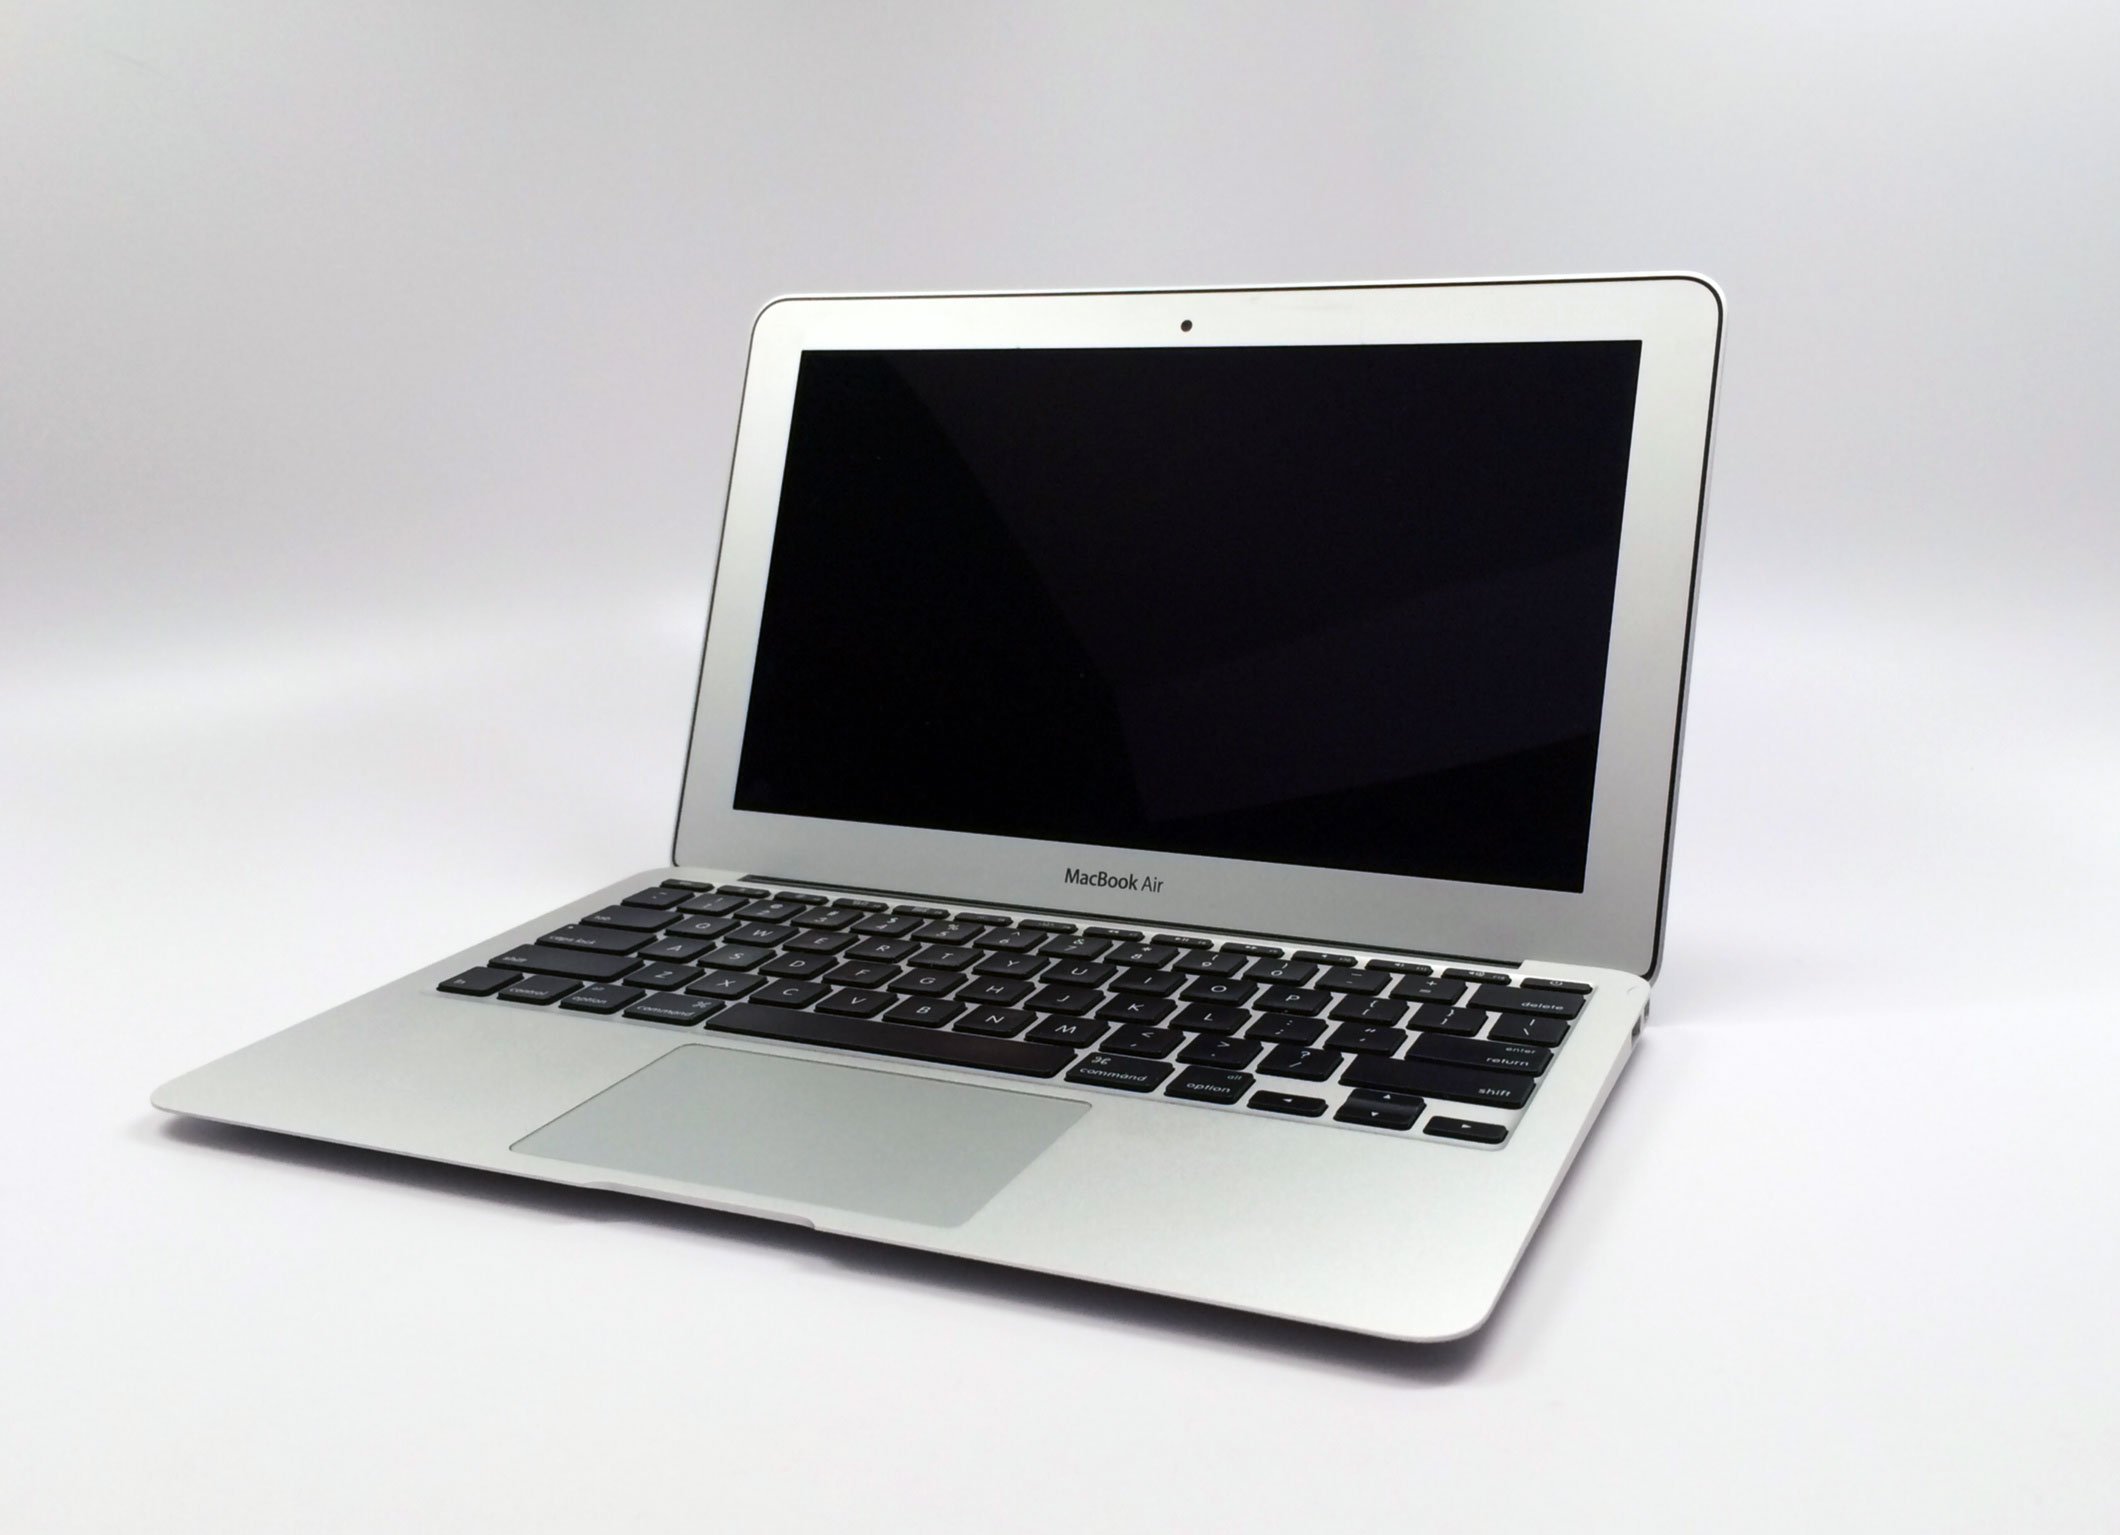 New details about how Apple may offer a MacBook Air Retina surface.